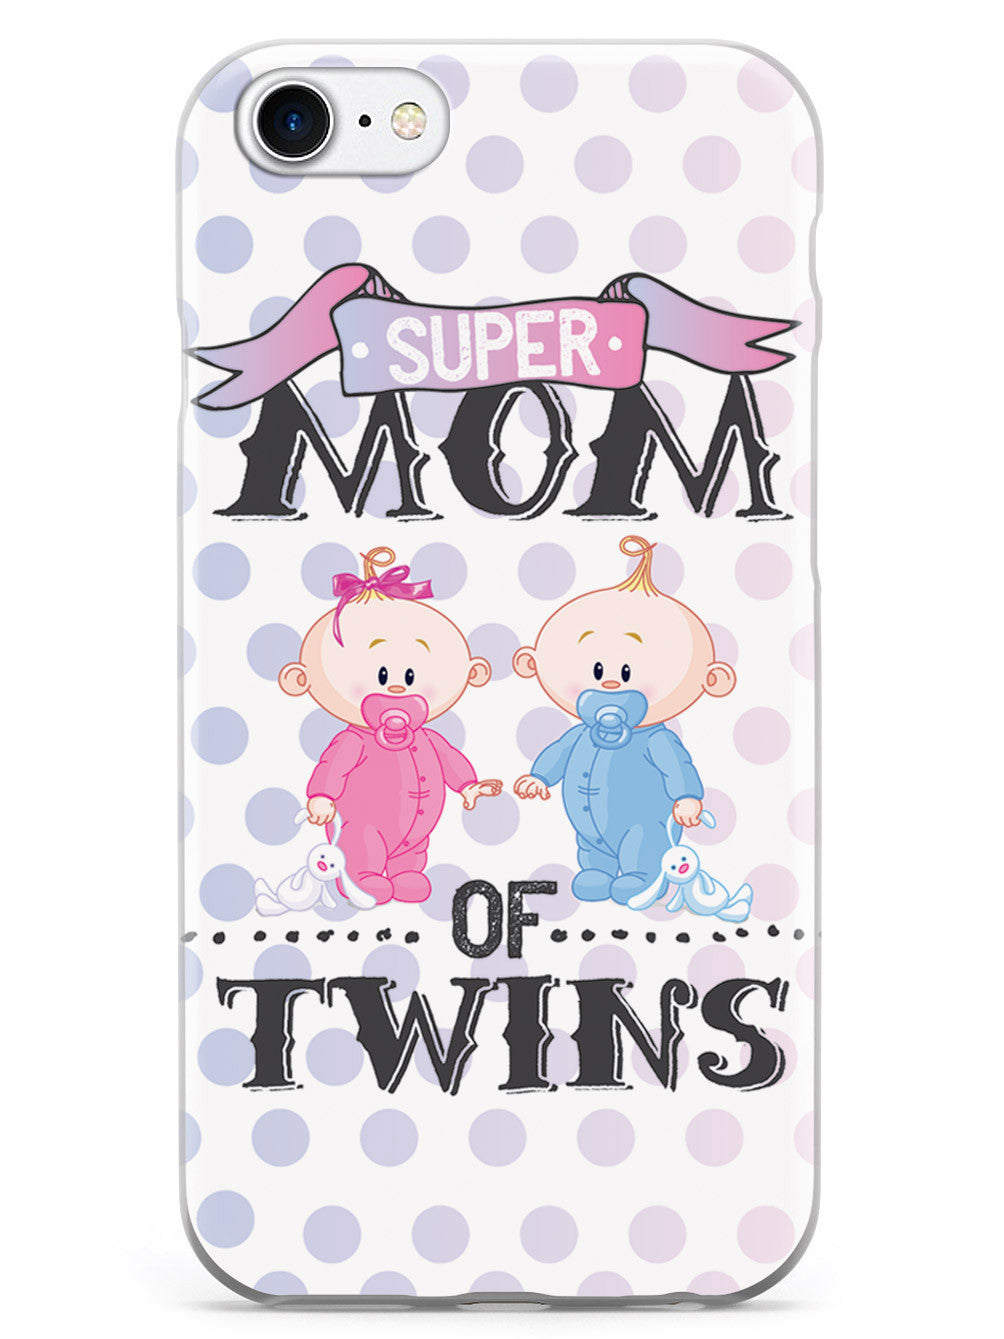 Super Mom of Twins - Girl and Boy Case